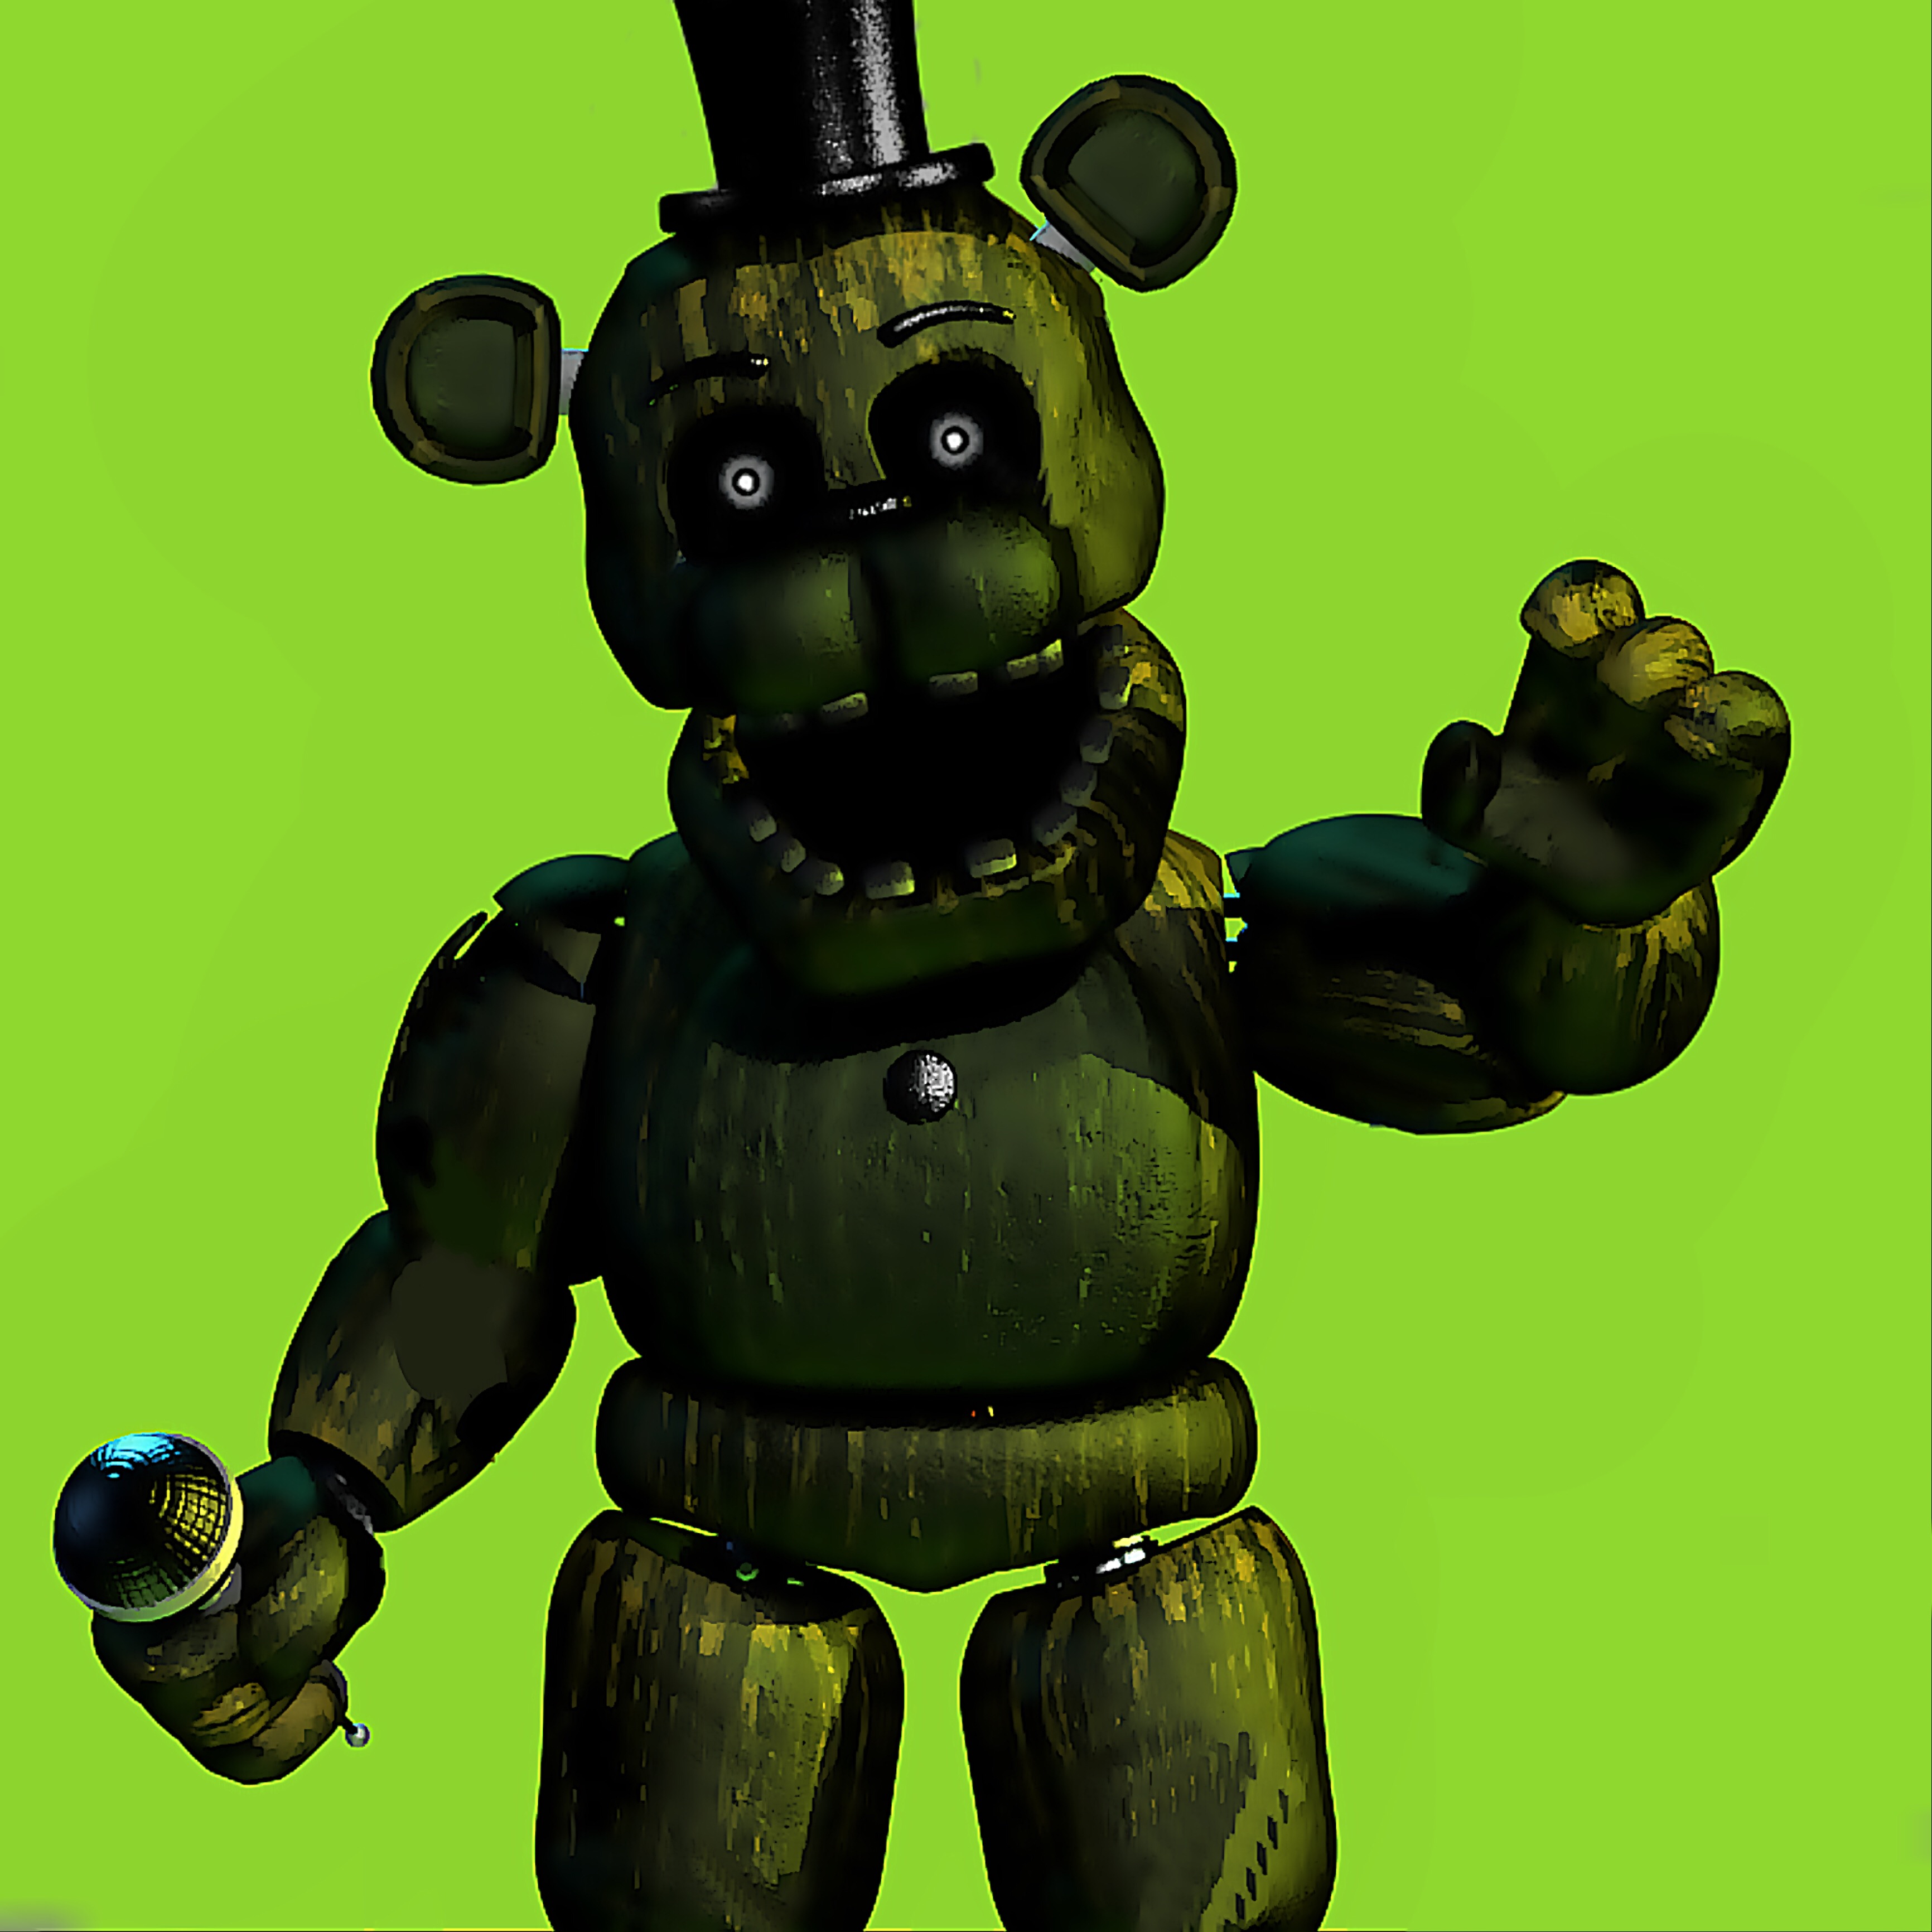 This visual is about freetoedit #freetoedit fixed phantom freddy.